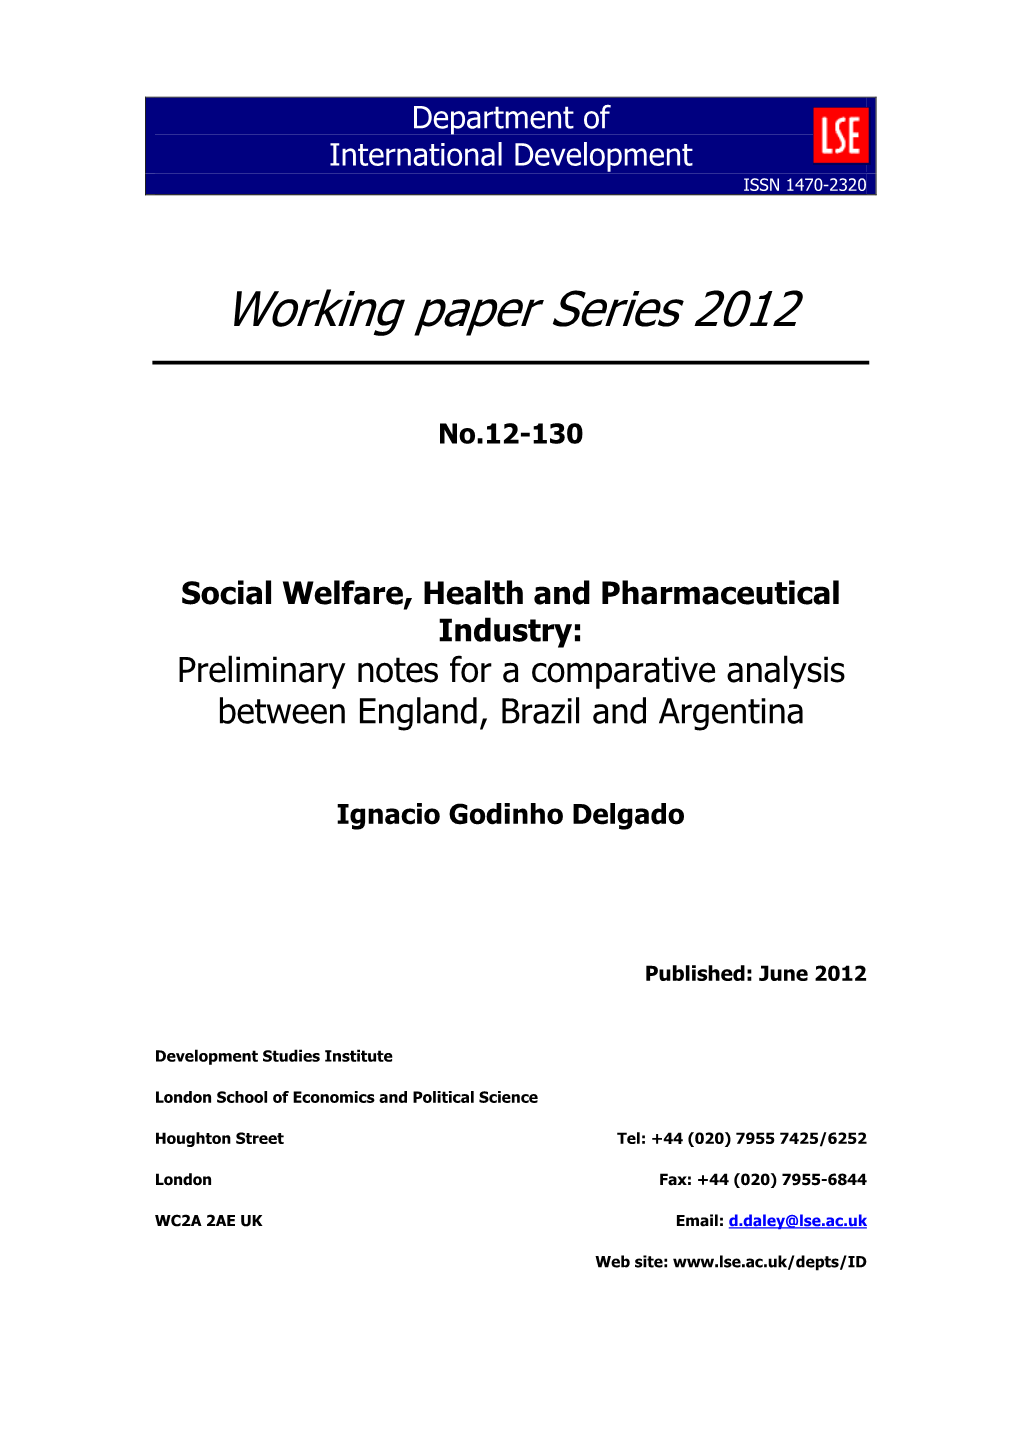 Social Welfare, Health and Pharmaceutical Industry: Preliminary Notes for a Comparative Analysis Between England, Brazil and Argentina